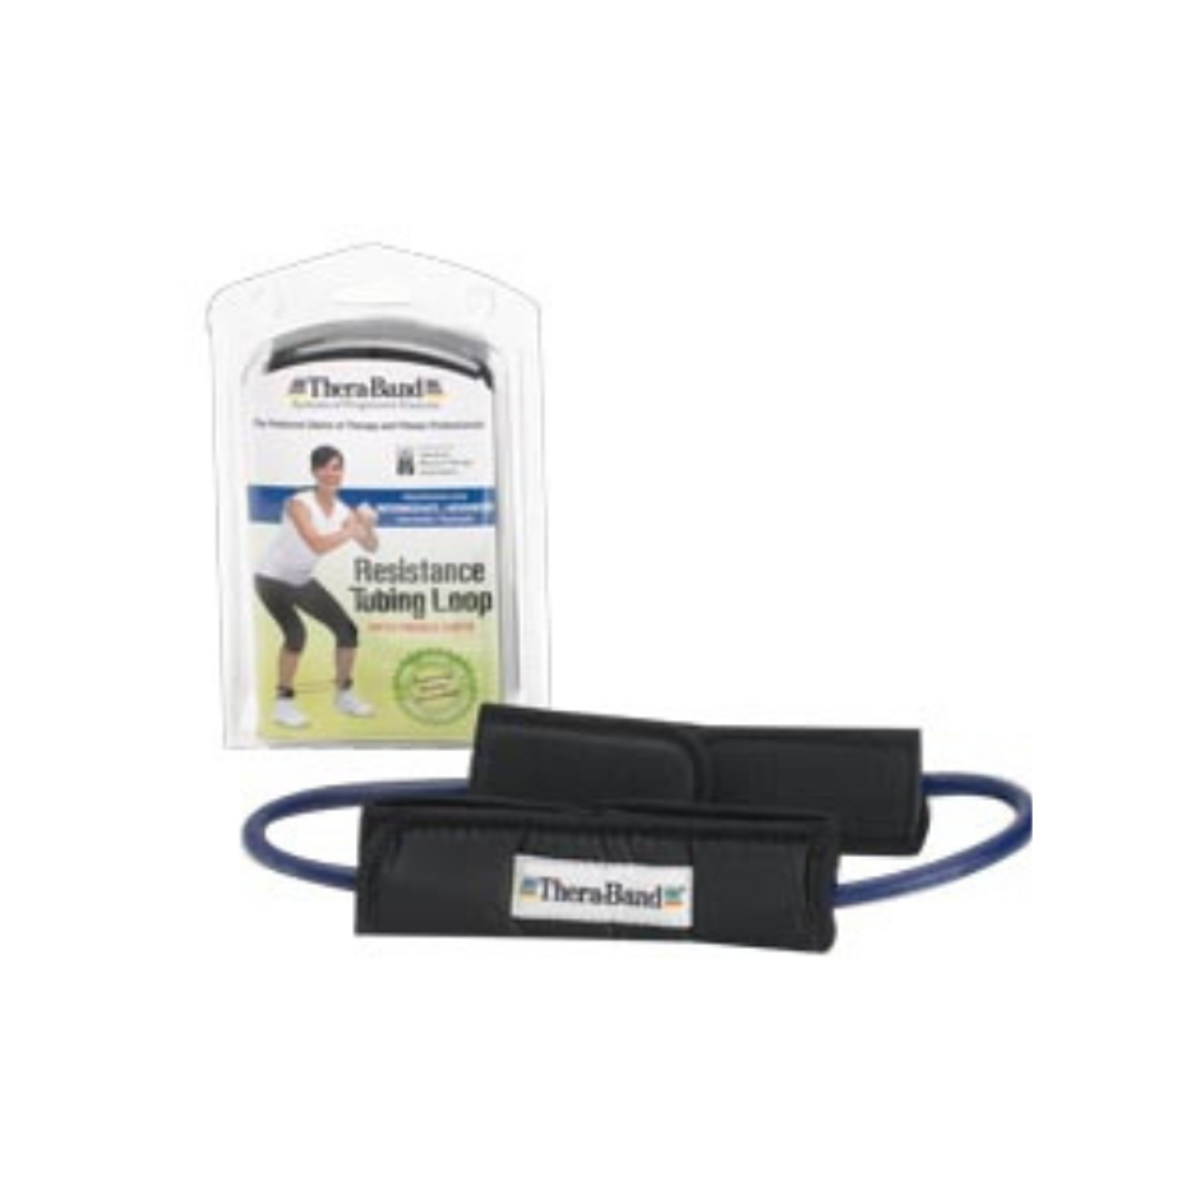 Hygenic/thera Band Professional Resistance Tubing Loop with Padded Cuffs